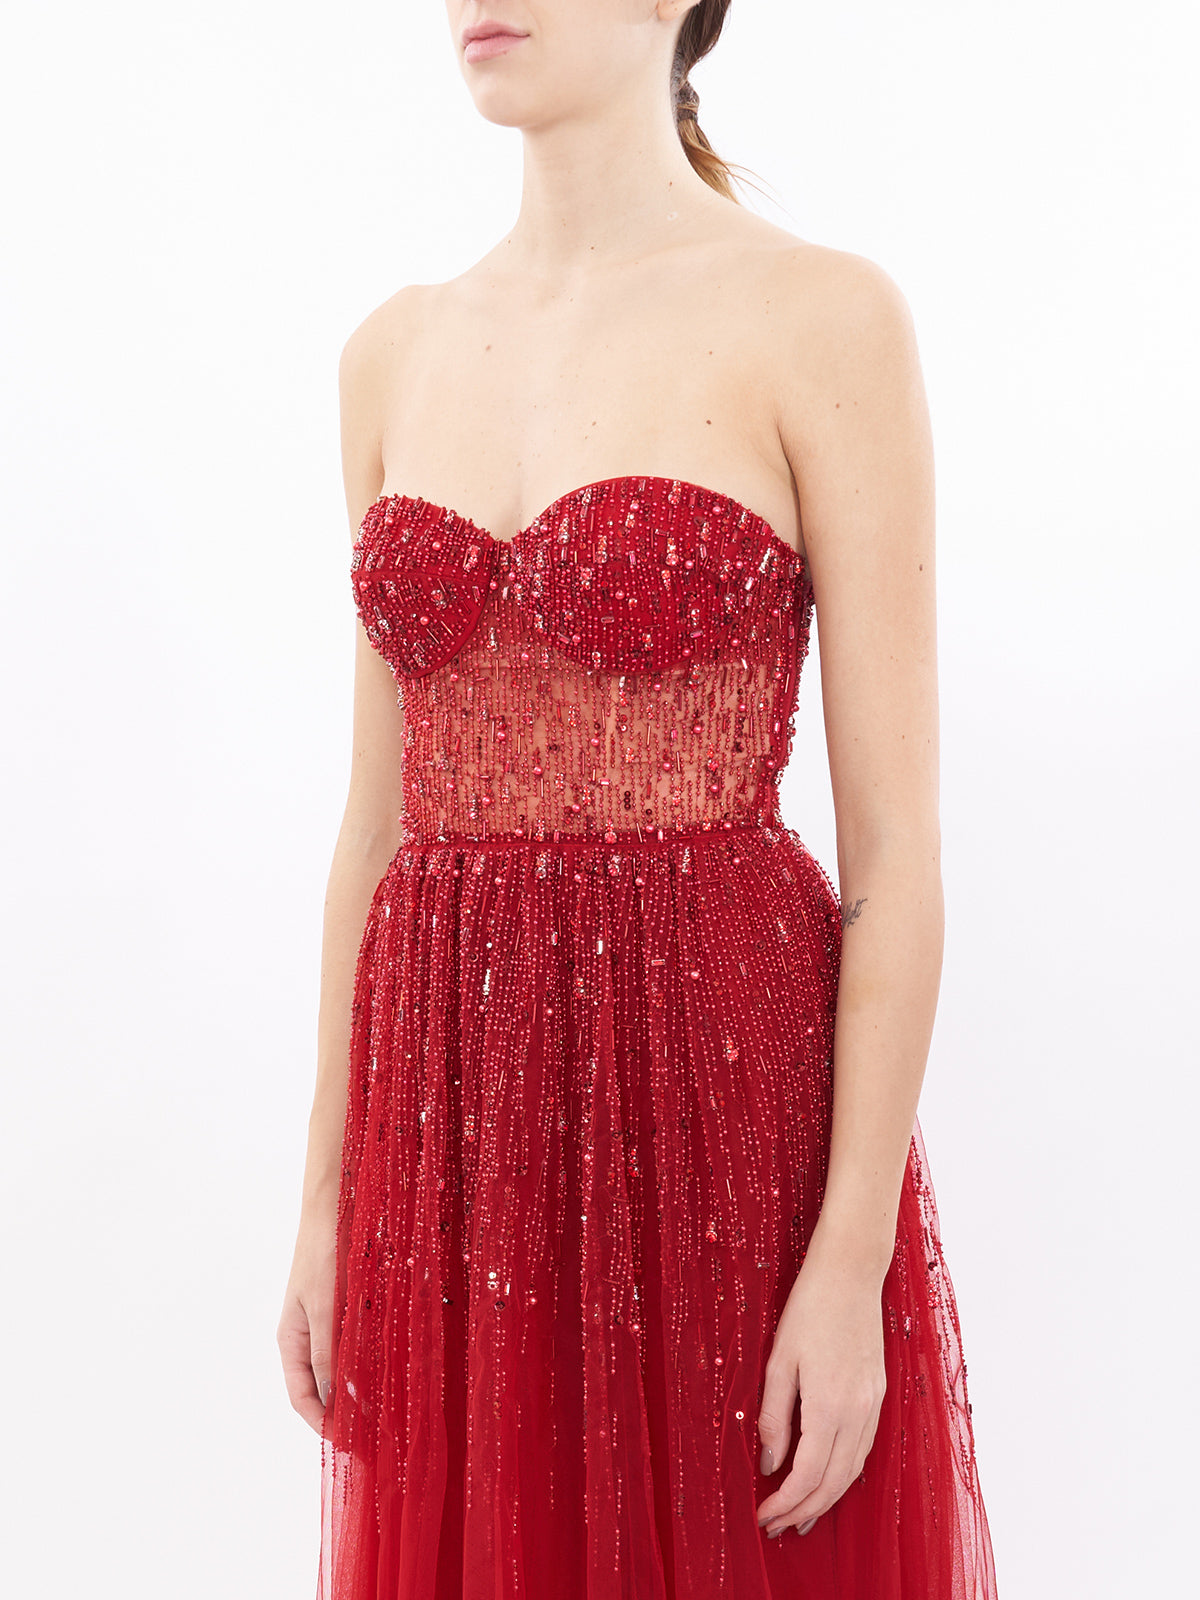 Red carpet dress with sequins and tulle flounces